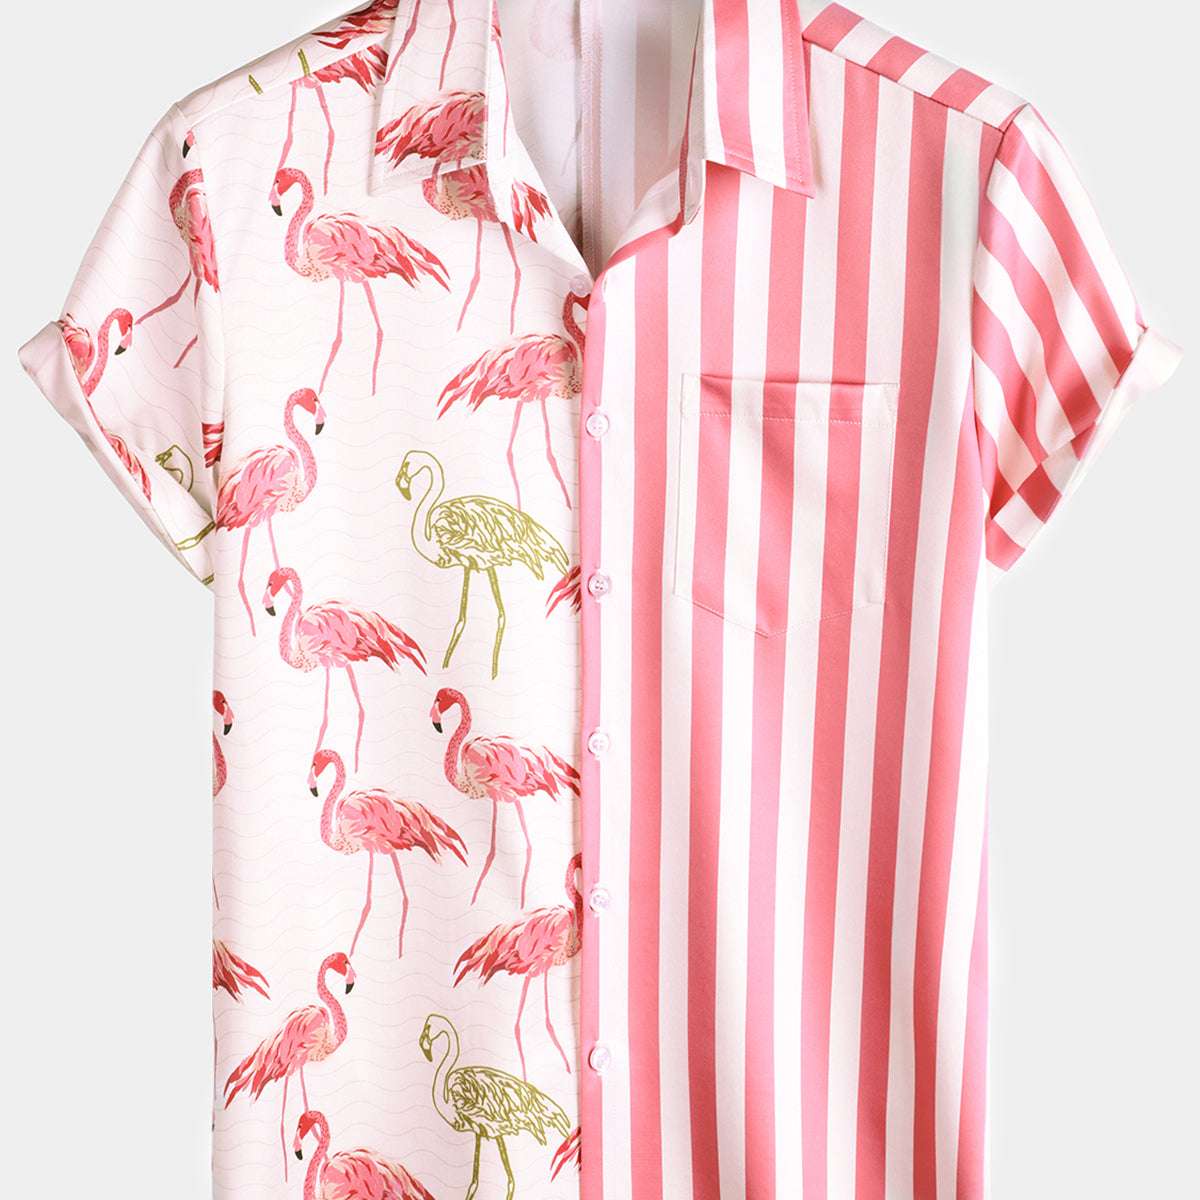 Men's Pink Flamingo Animal Striped Tropical Pocket Button Up Vacation Short Sleeve Beach Cruise Camp Shirt